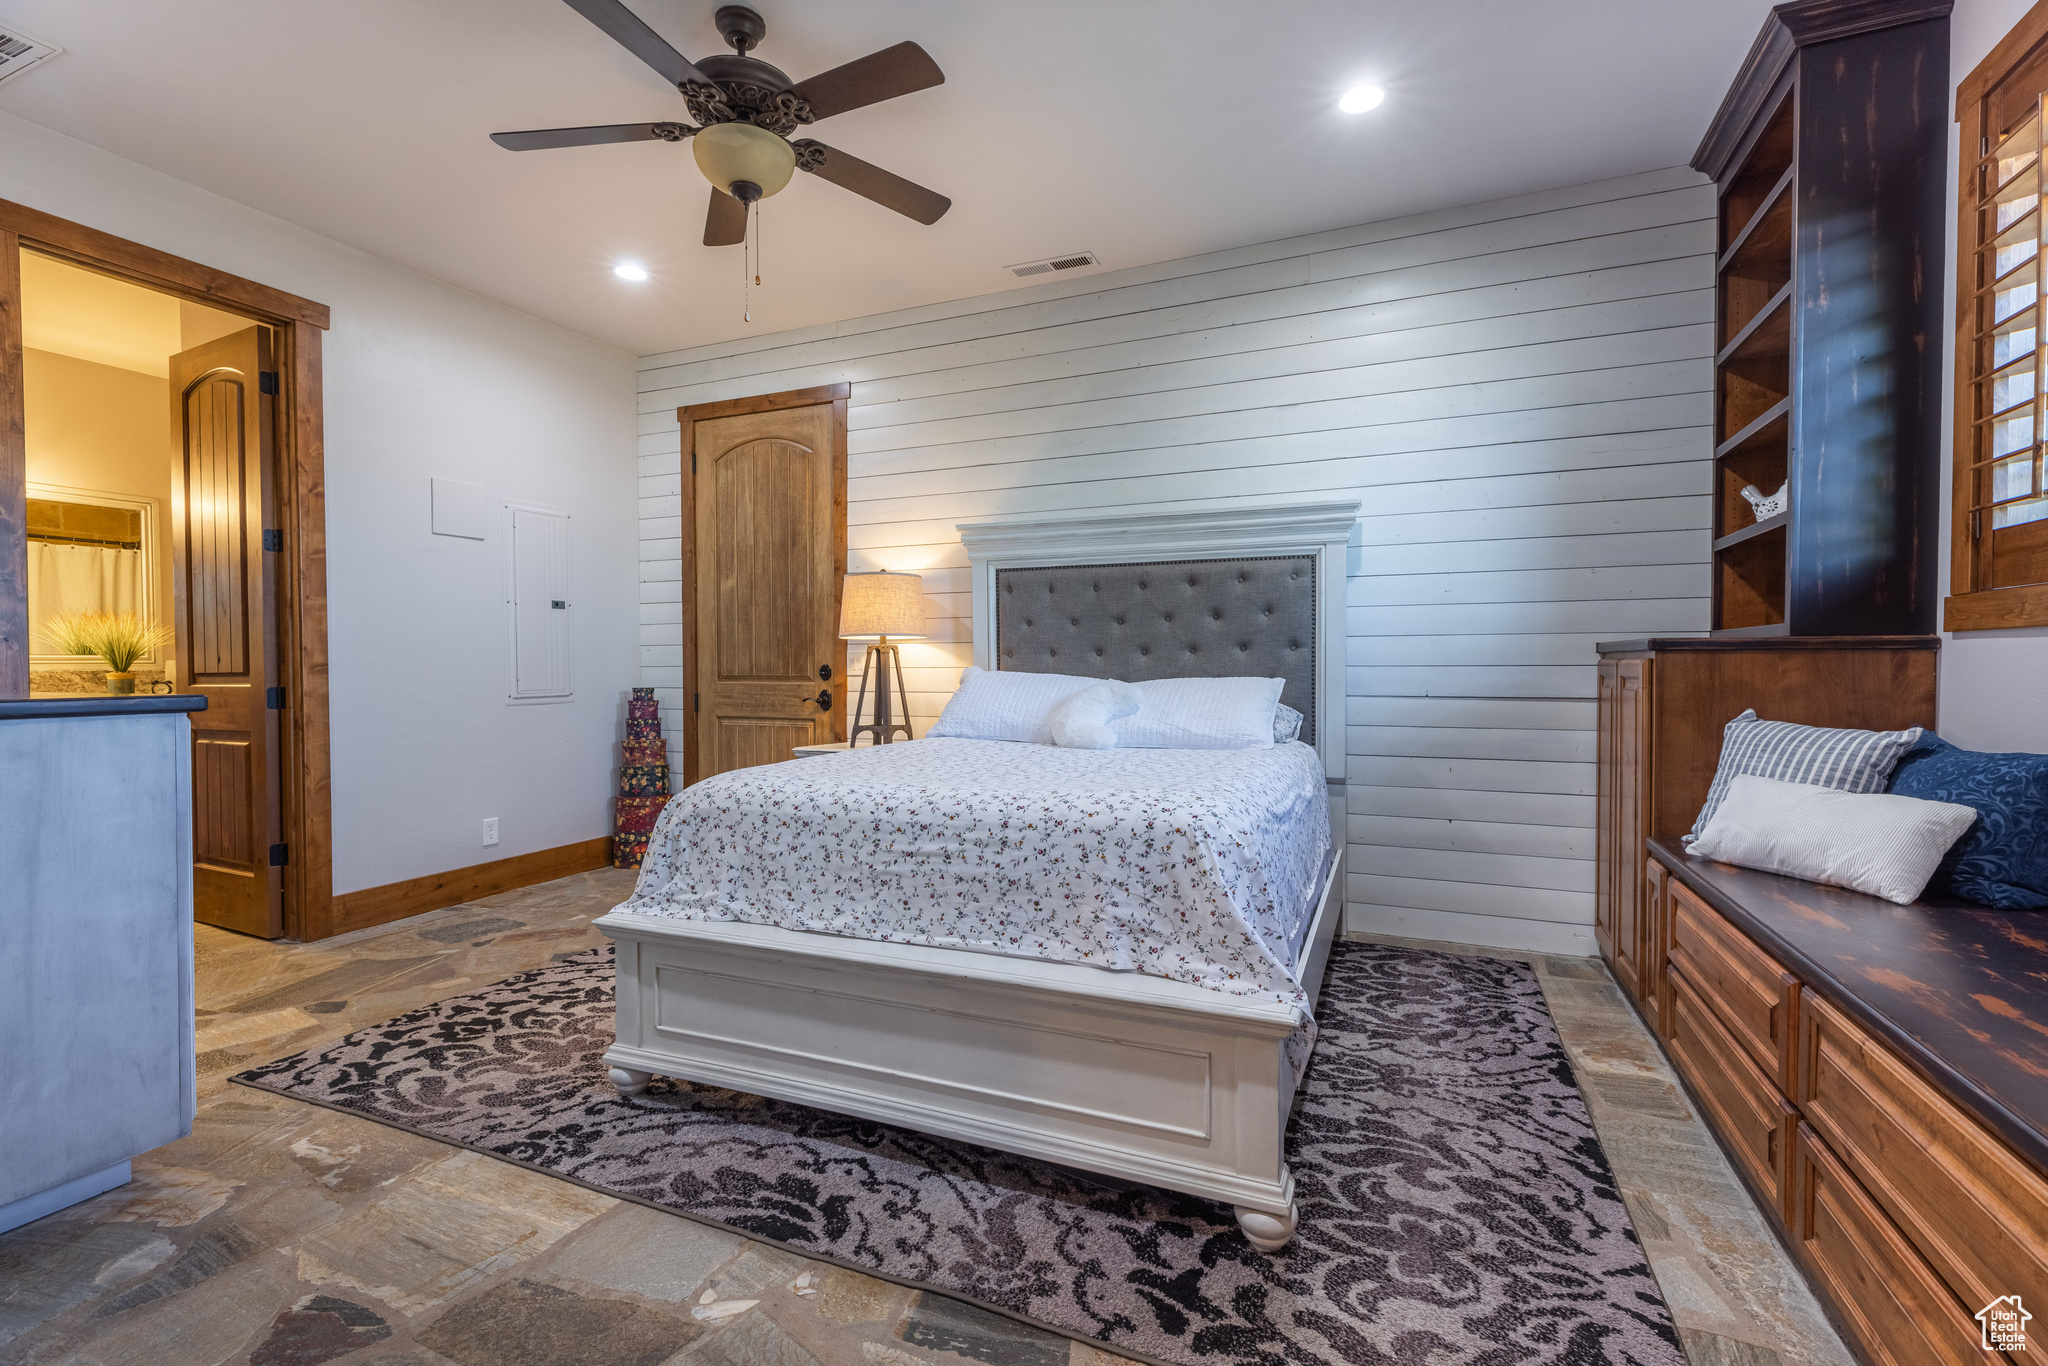 Bedroom with custom woodwork details including wood walls and ceiling fan